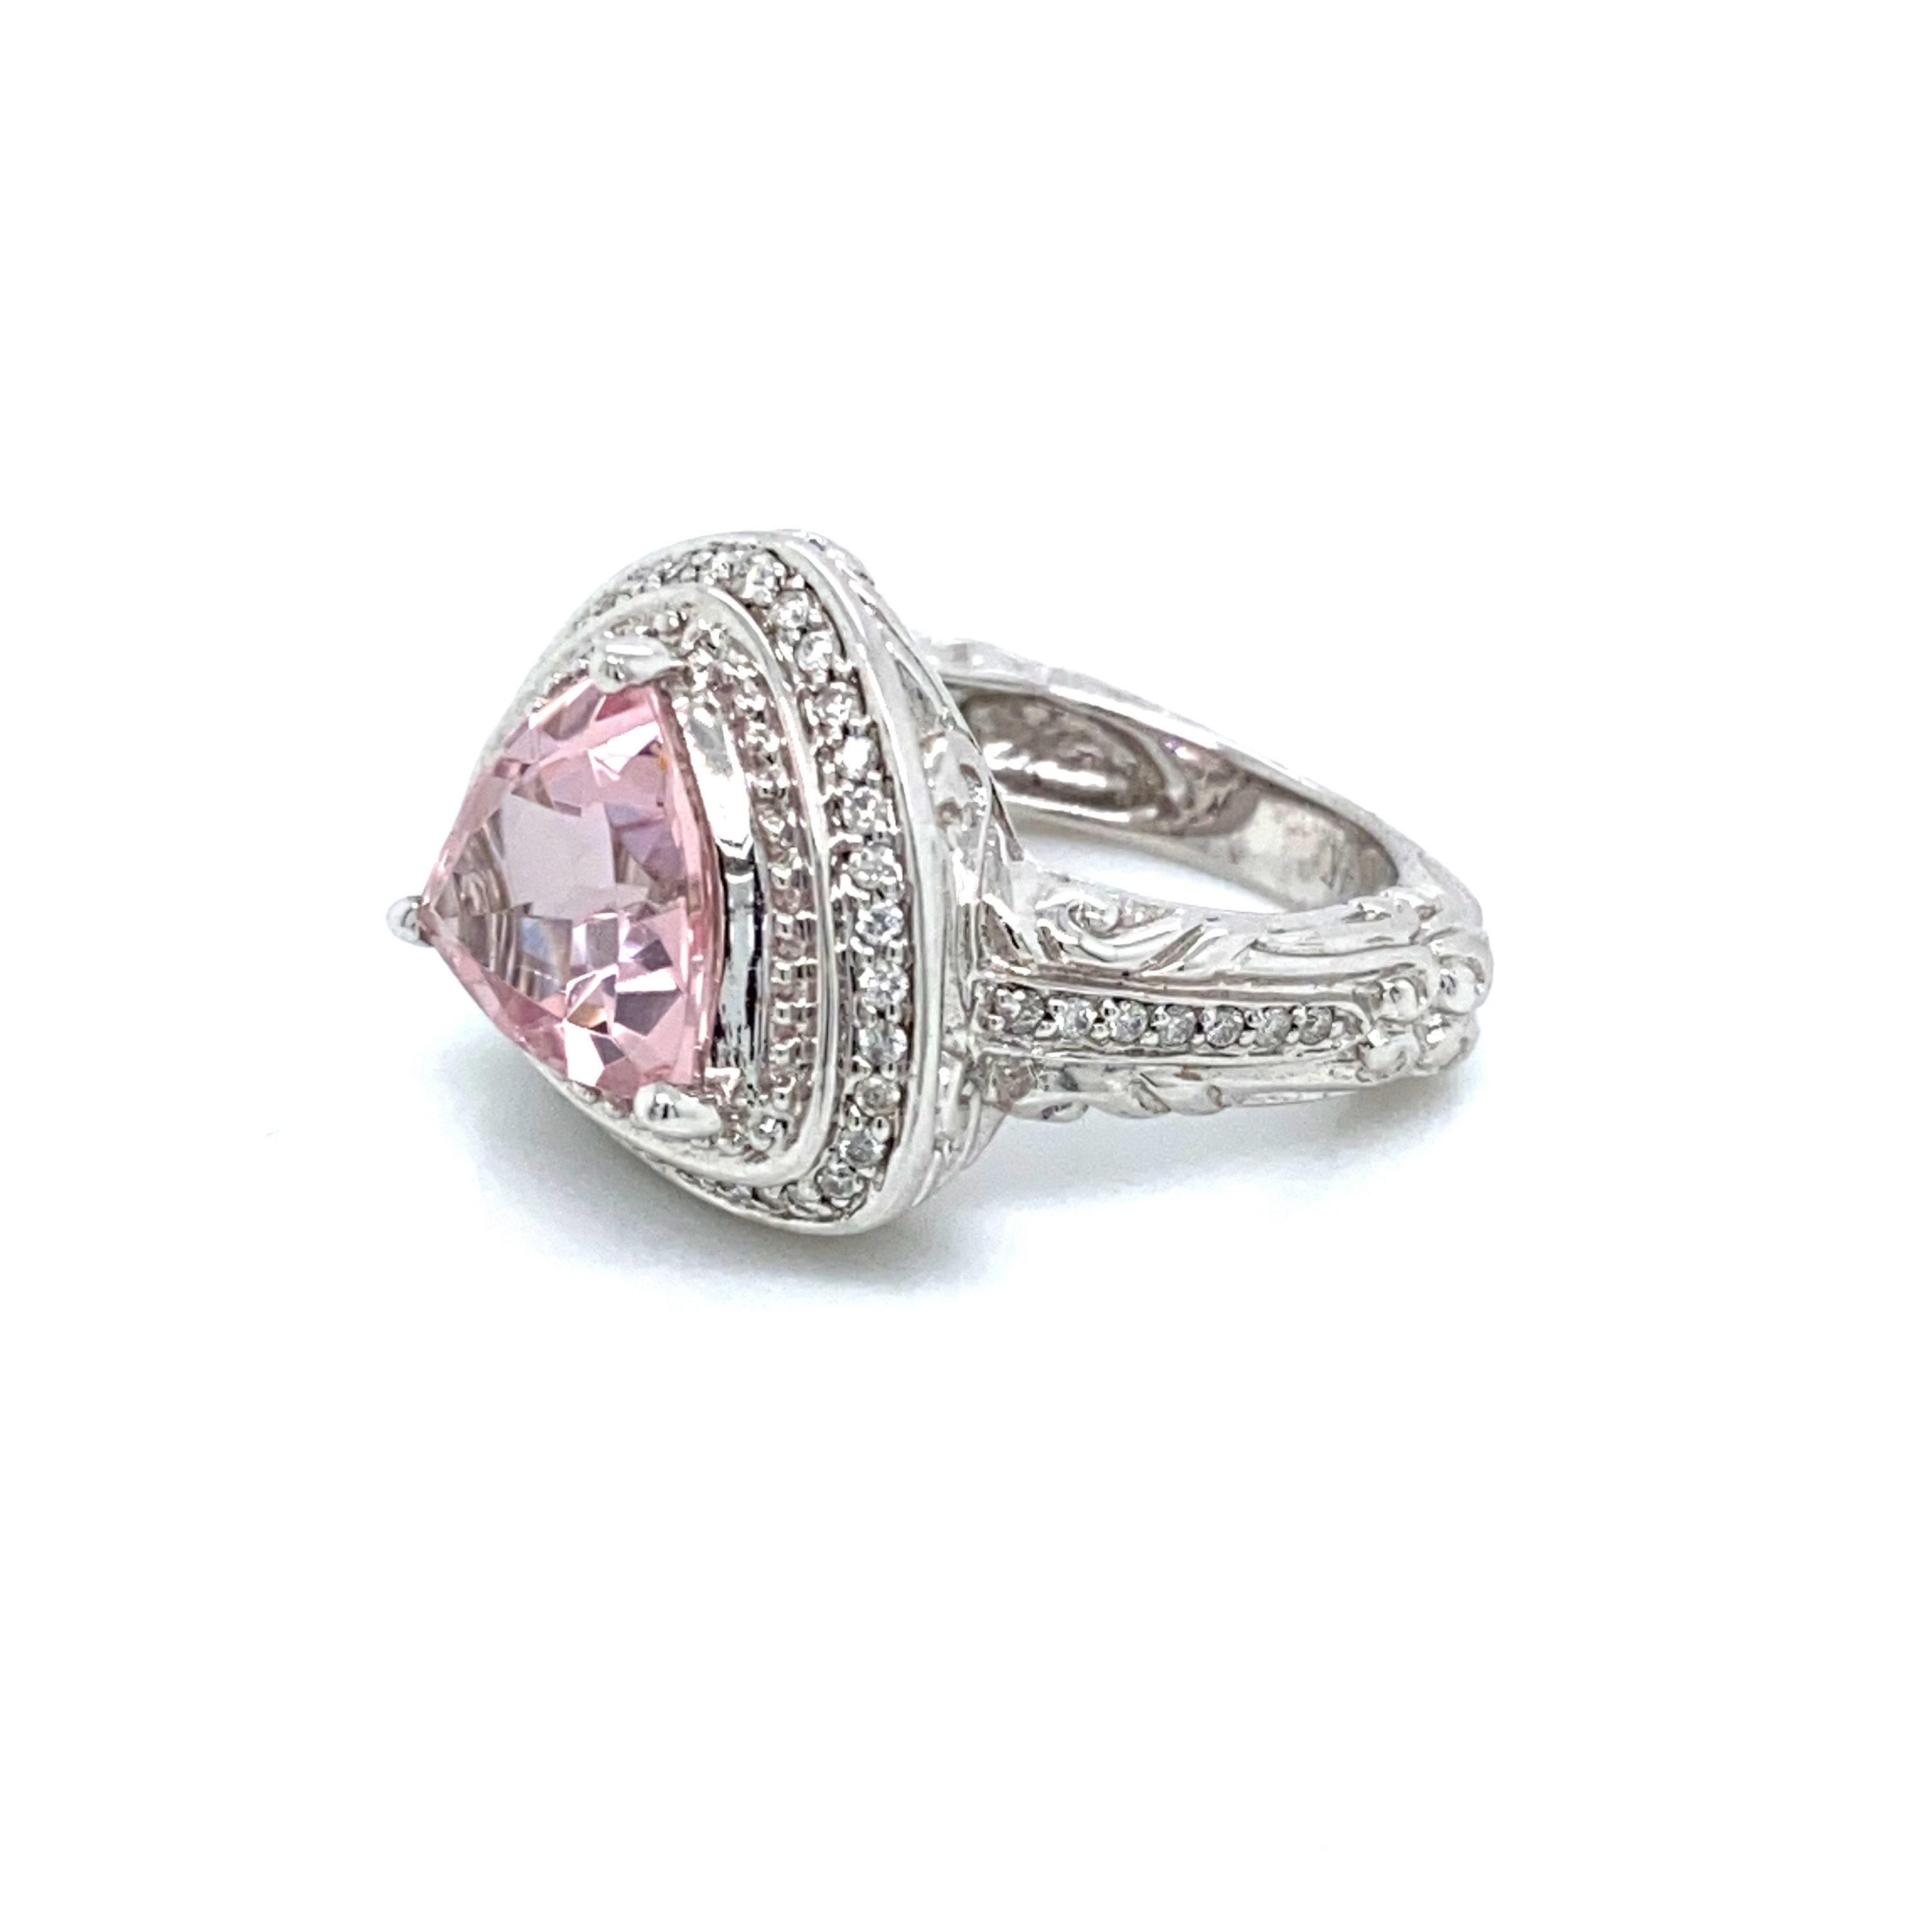 This is a gorgeous natural morganite and diamond halo vintage ring set in solid 14K white gold. This ring features a  natural 2.34 Ct trillion cut pink morganite which has an excellent royal pink color (AAA quality gem) and is surrounded by a double